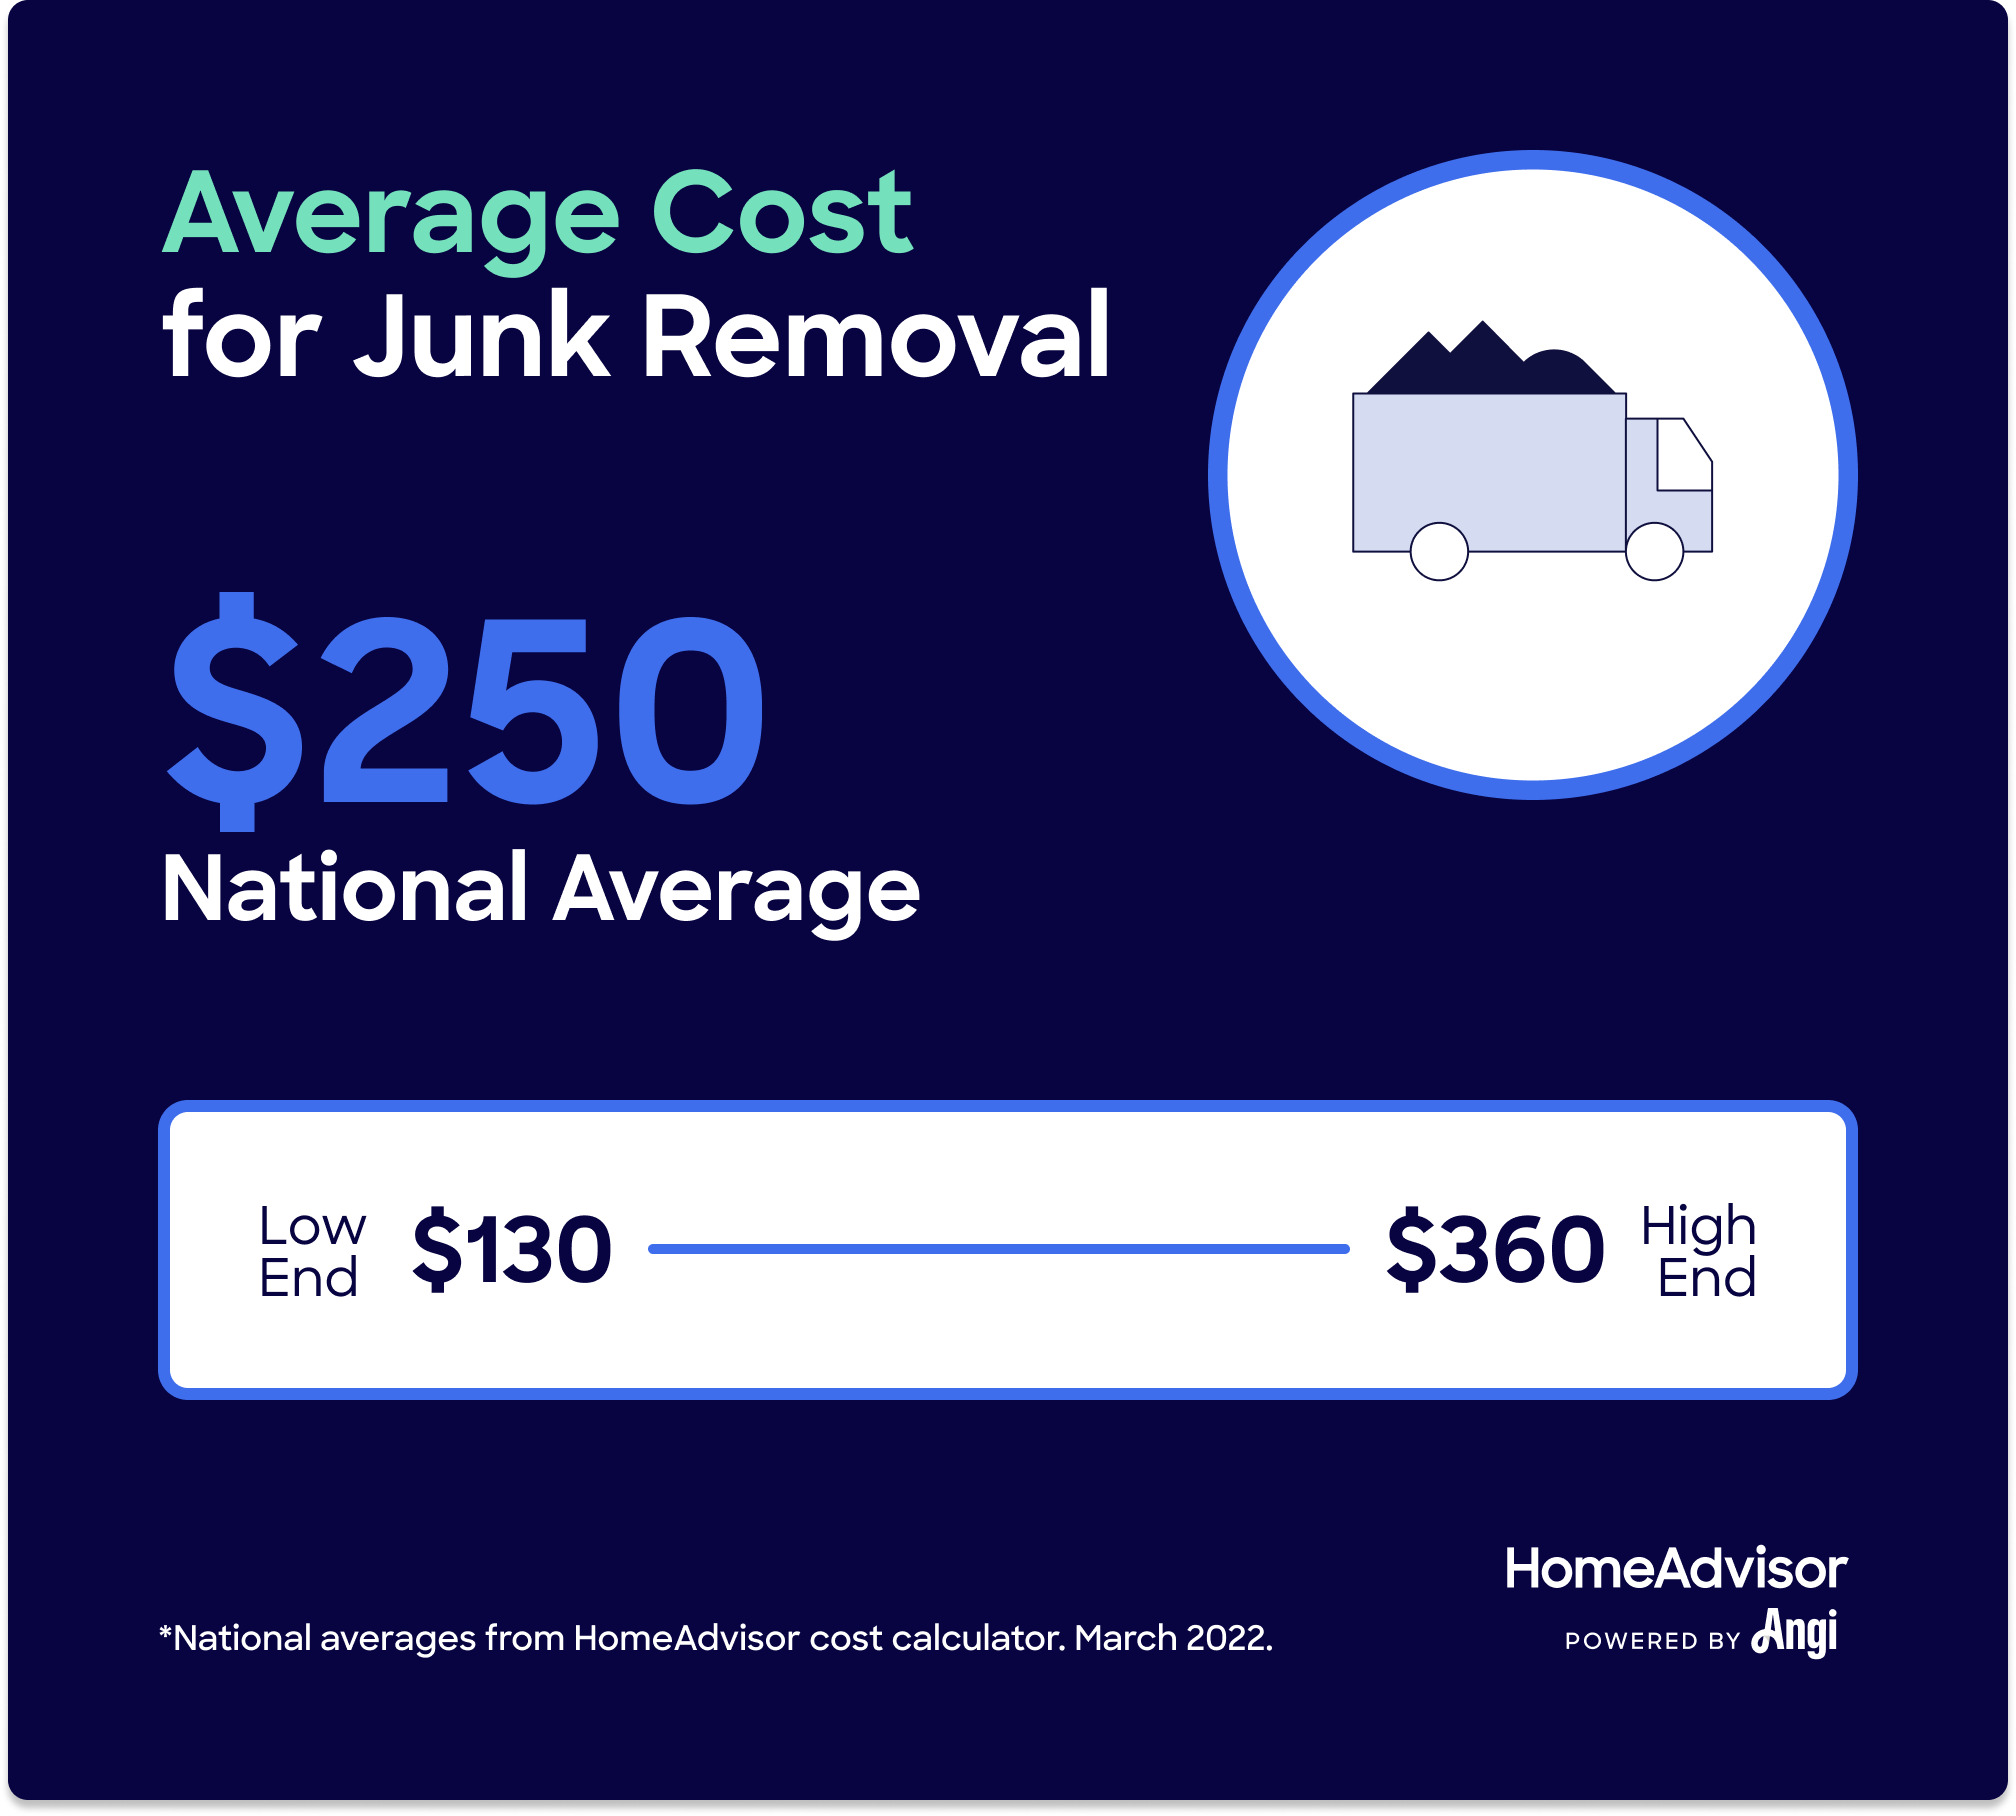 How Much Does Junk Removal Cost In Las Vegas?